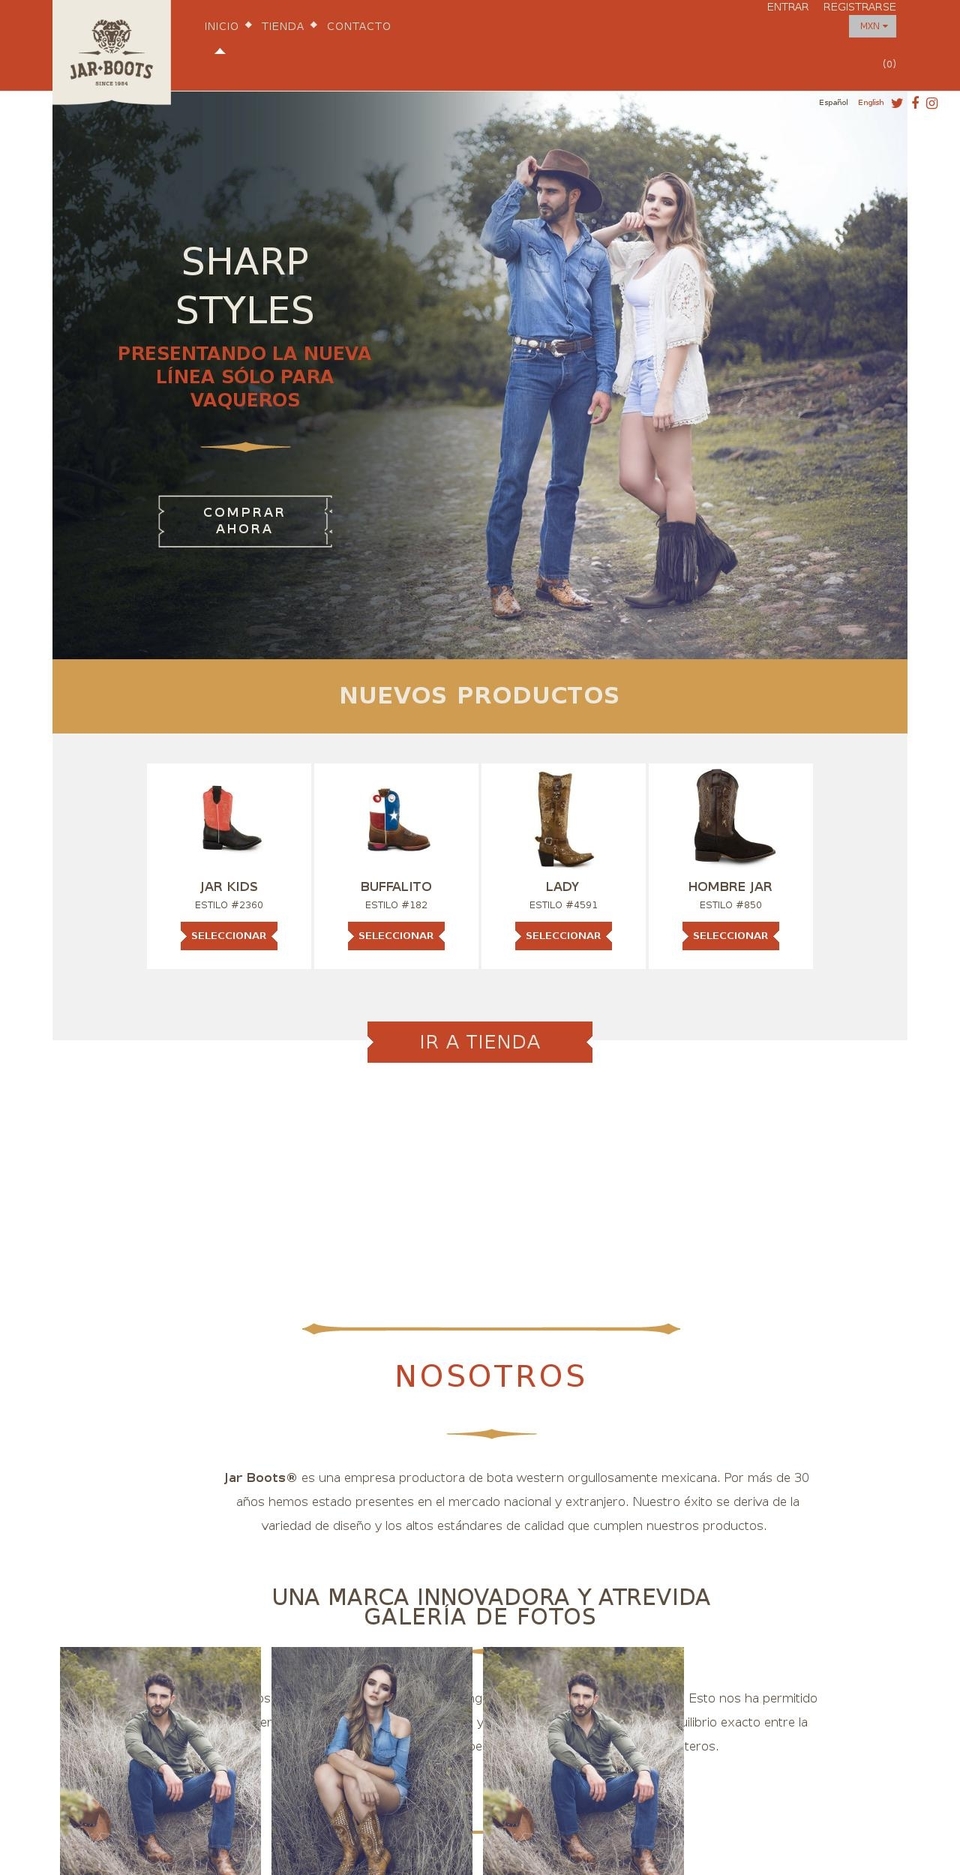 enroll-shopify-theme-v- Shopify theme site example jarboots.mx